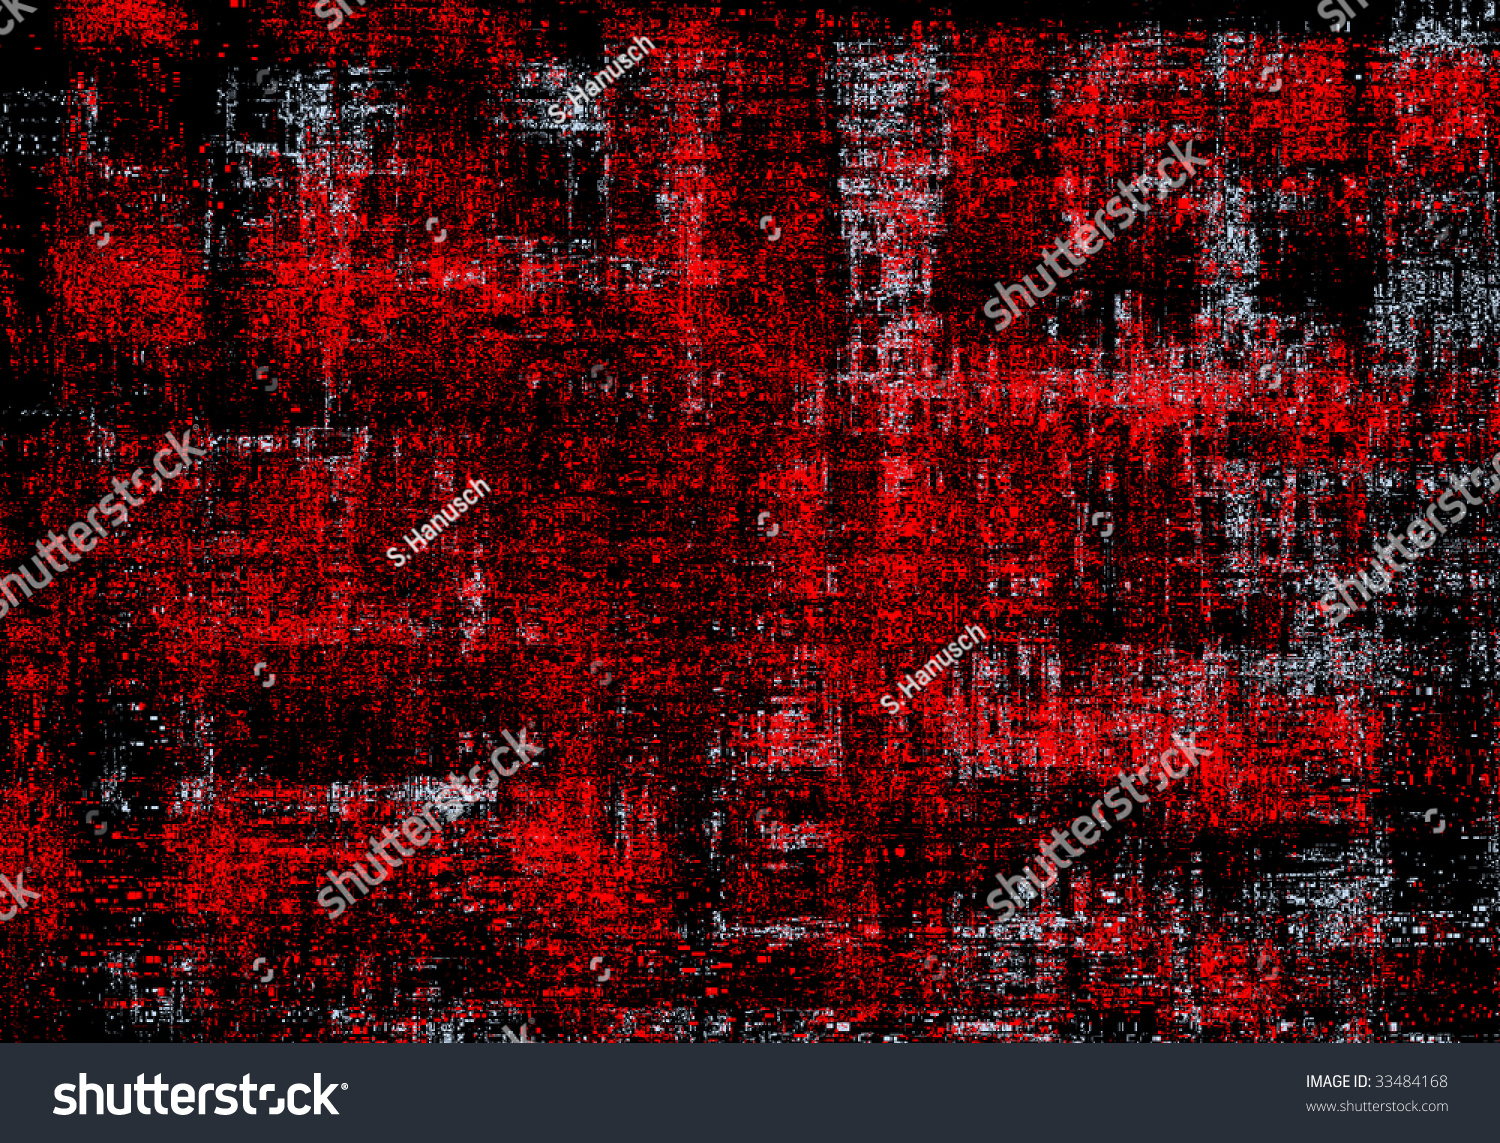 Abstract Background, Red, White, Black Stock Photo 33484168 : Shutterstock